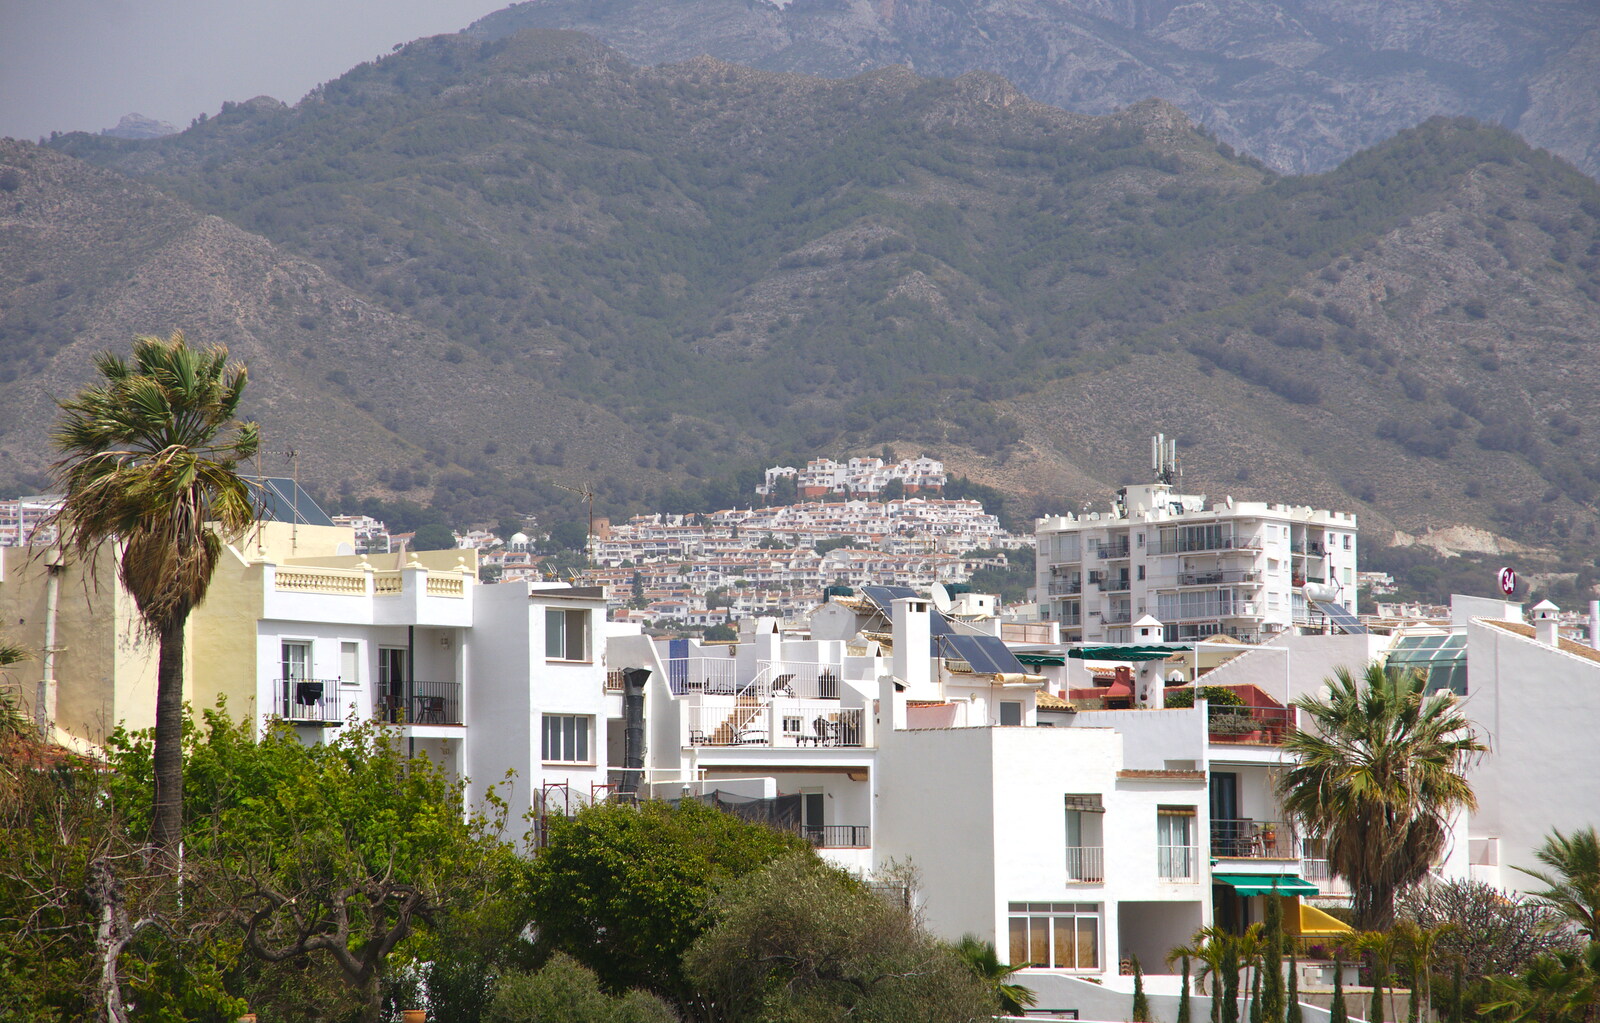 Our apartment is right at the back from Torrecilla Beach and the Nerja Museum, Andalusia, Spain - 17th April 2019